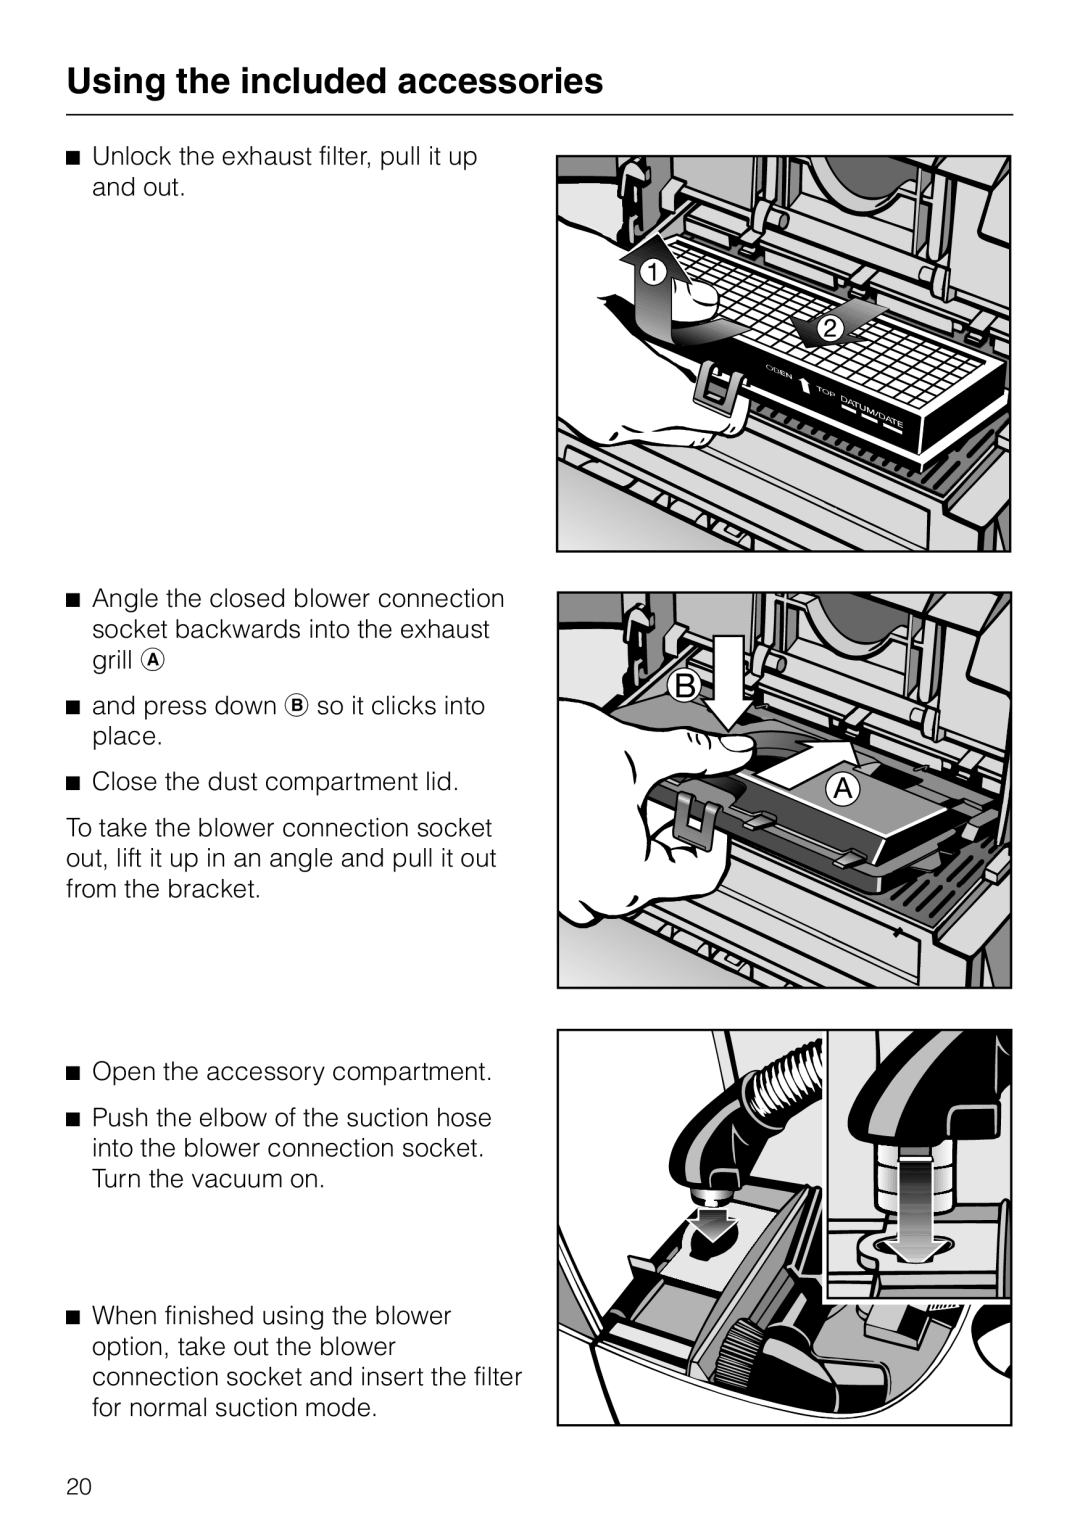 Miele S 300i - S 318i operating instructions Using the included accessories, Unlock the exhaust filter, pull it up and out 